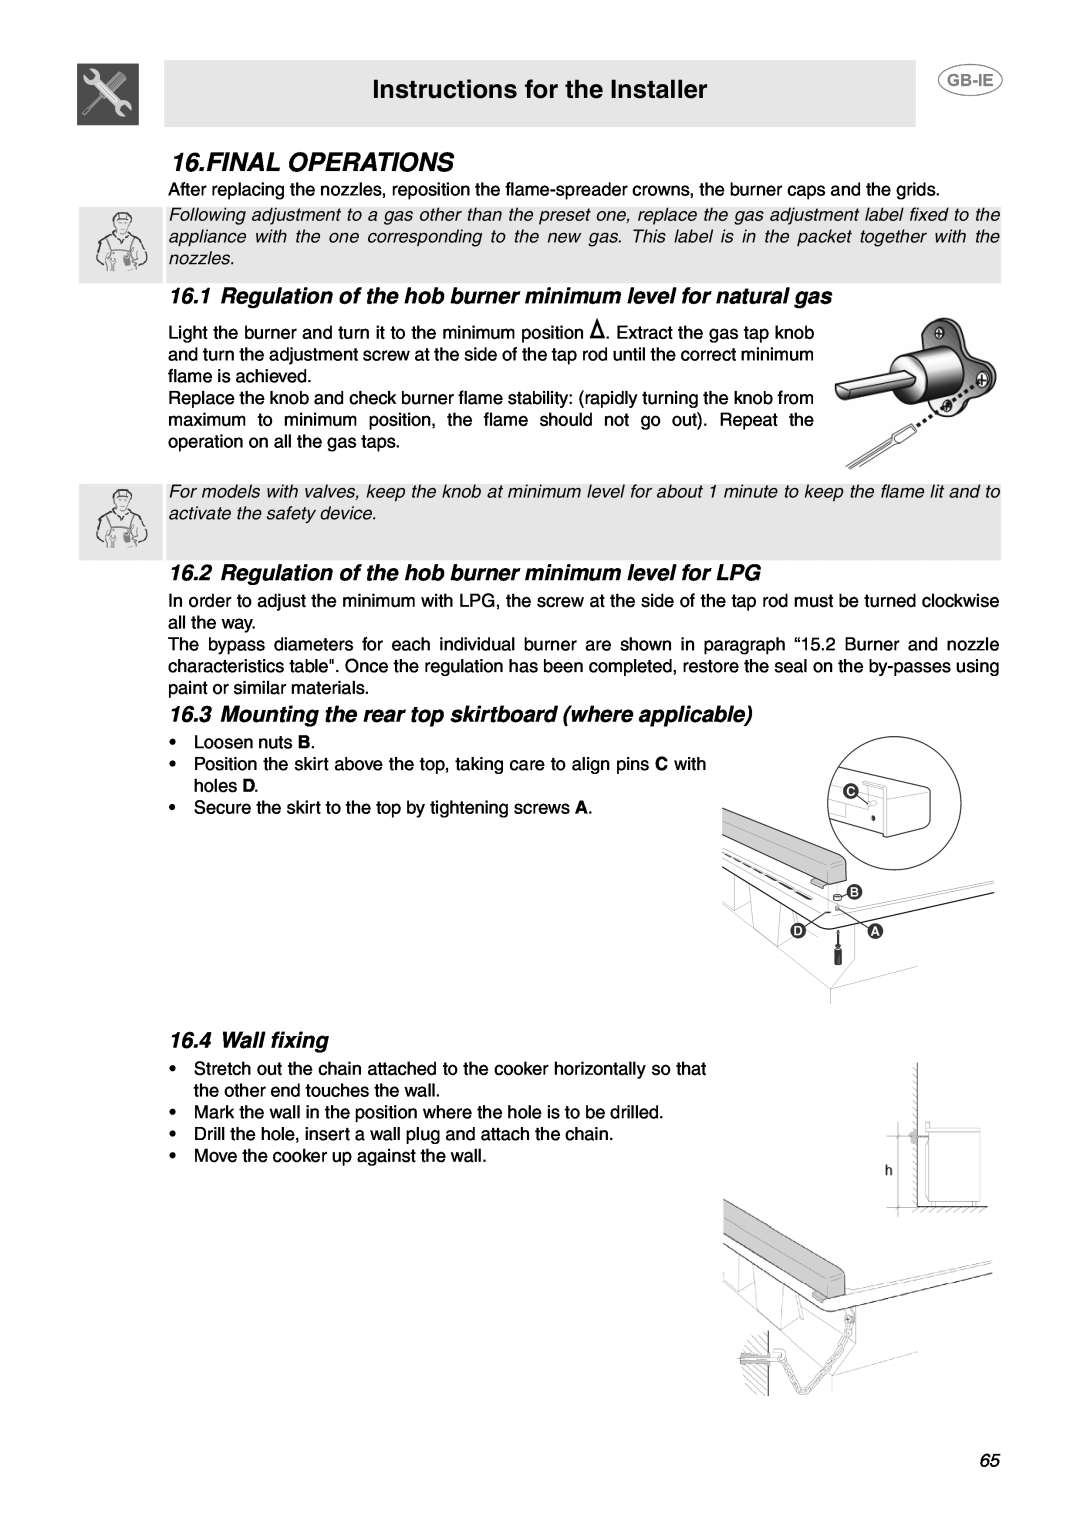 Smeg CP60X6 manual Final Operations, Wall fixing, Instructions for the Installer 